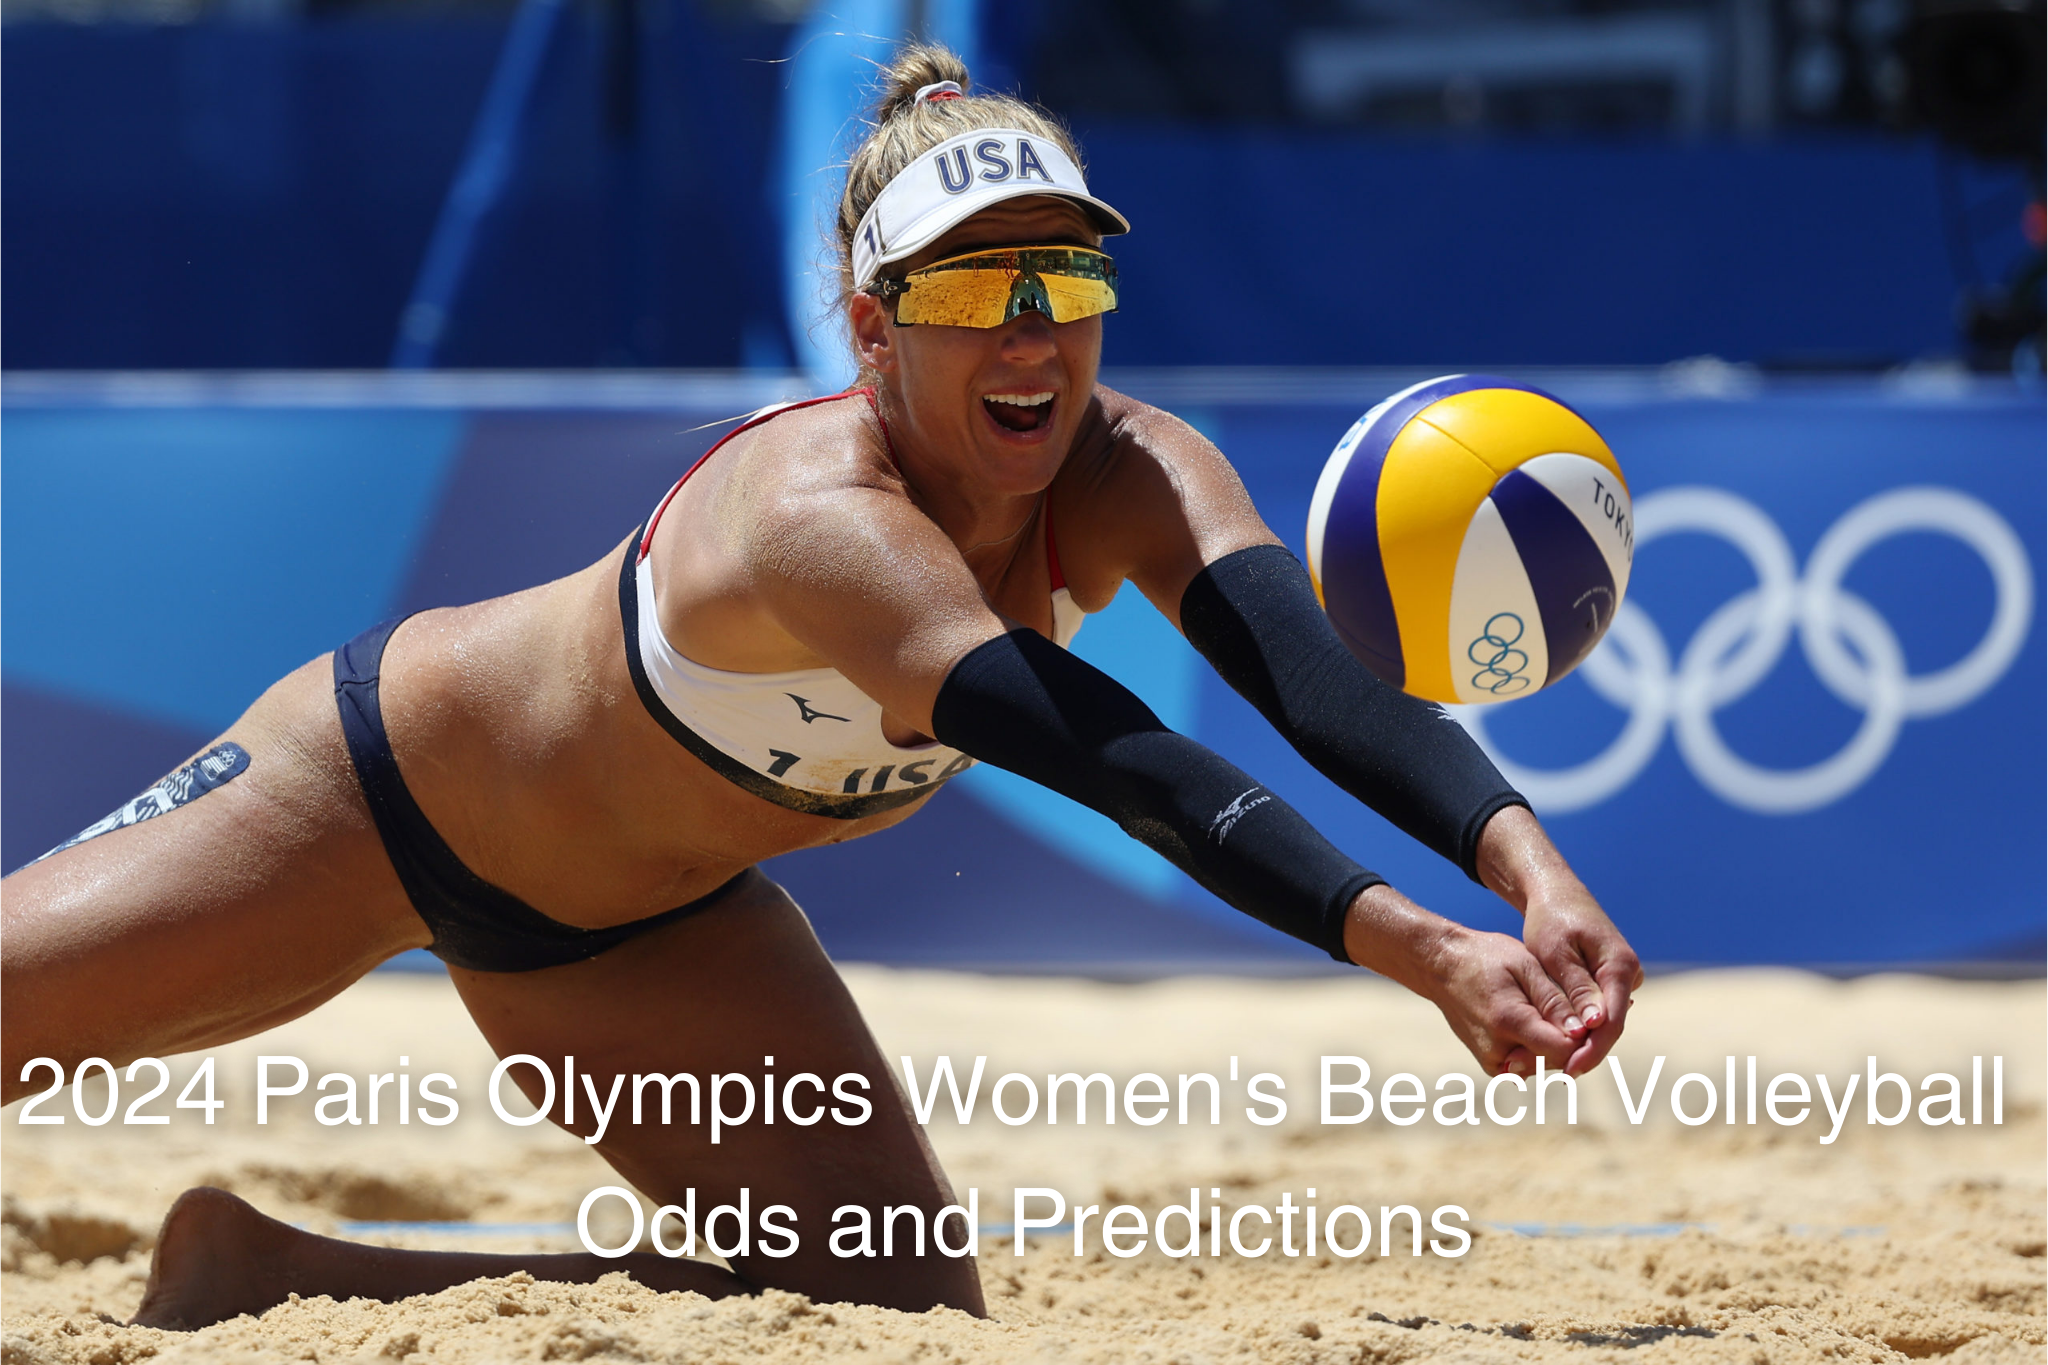 Olympics Women's Beach Volleyball competitor